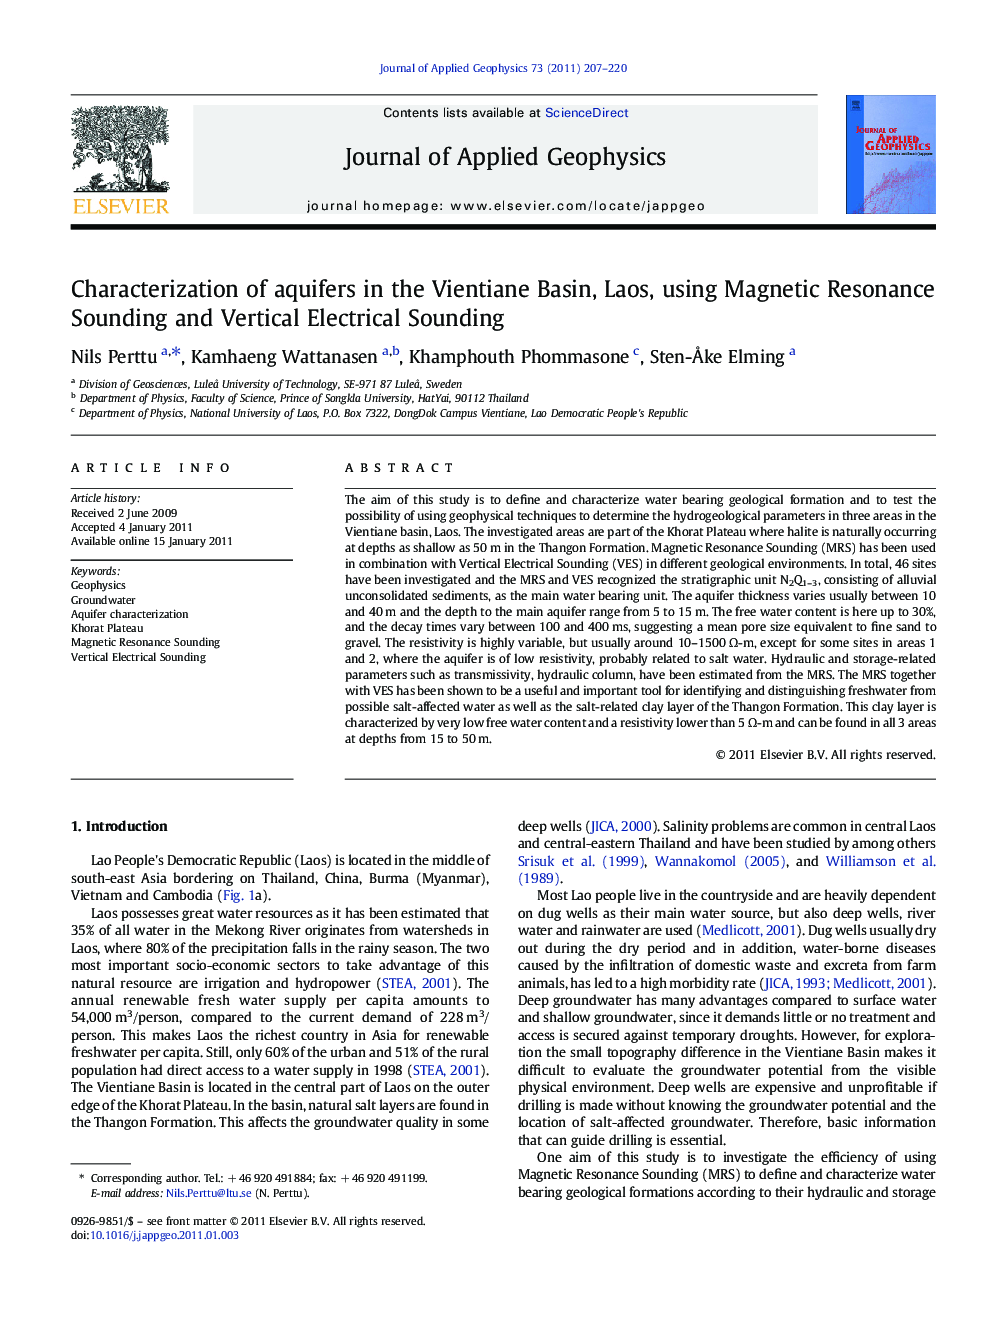 Characterization of aquifers in the Vientiane Basin, Laos, using Magnetic Resonance Sounding and Vertical Electrical Sounding